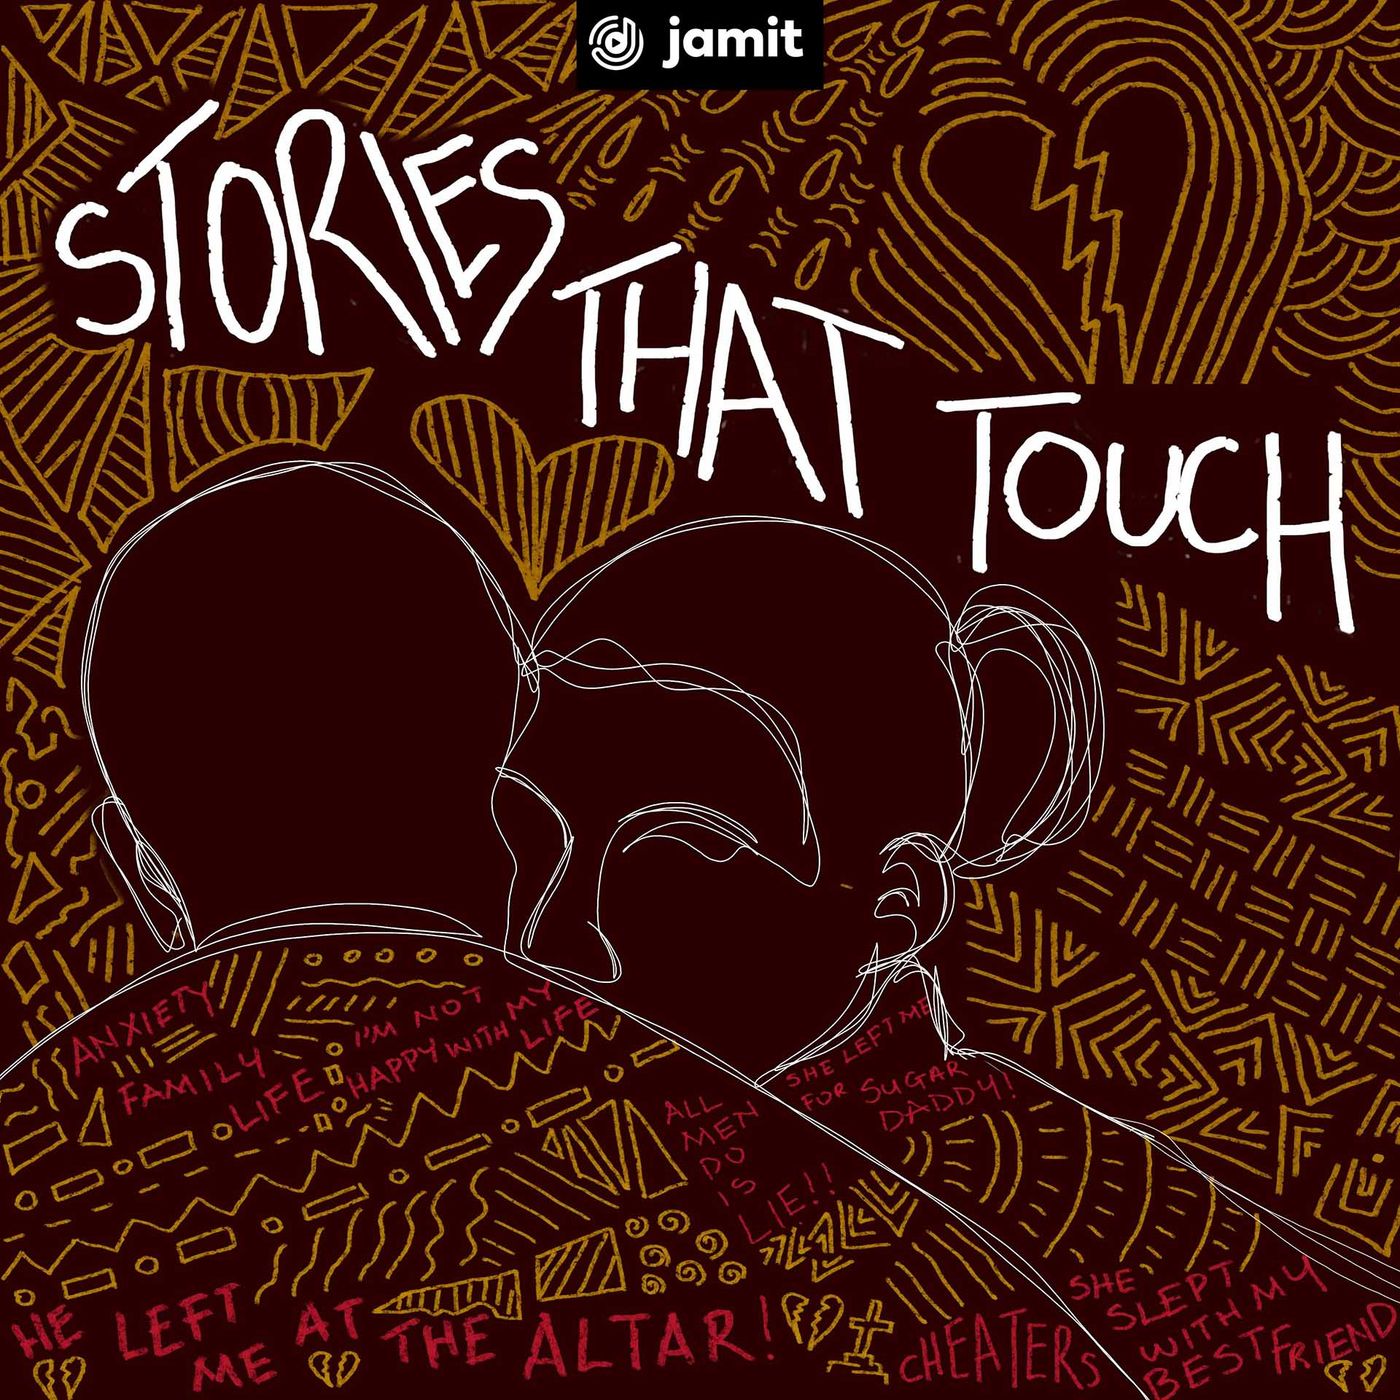 Stories That Touch podcast